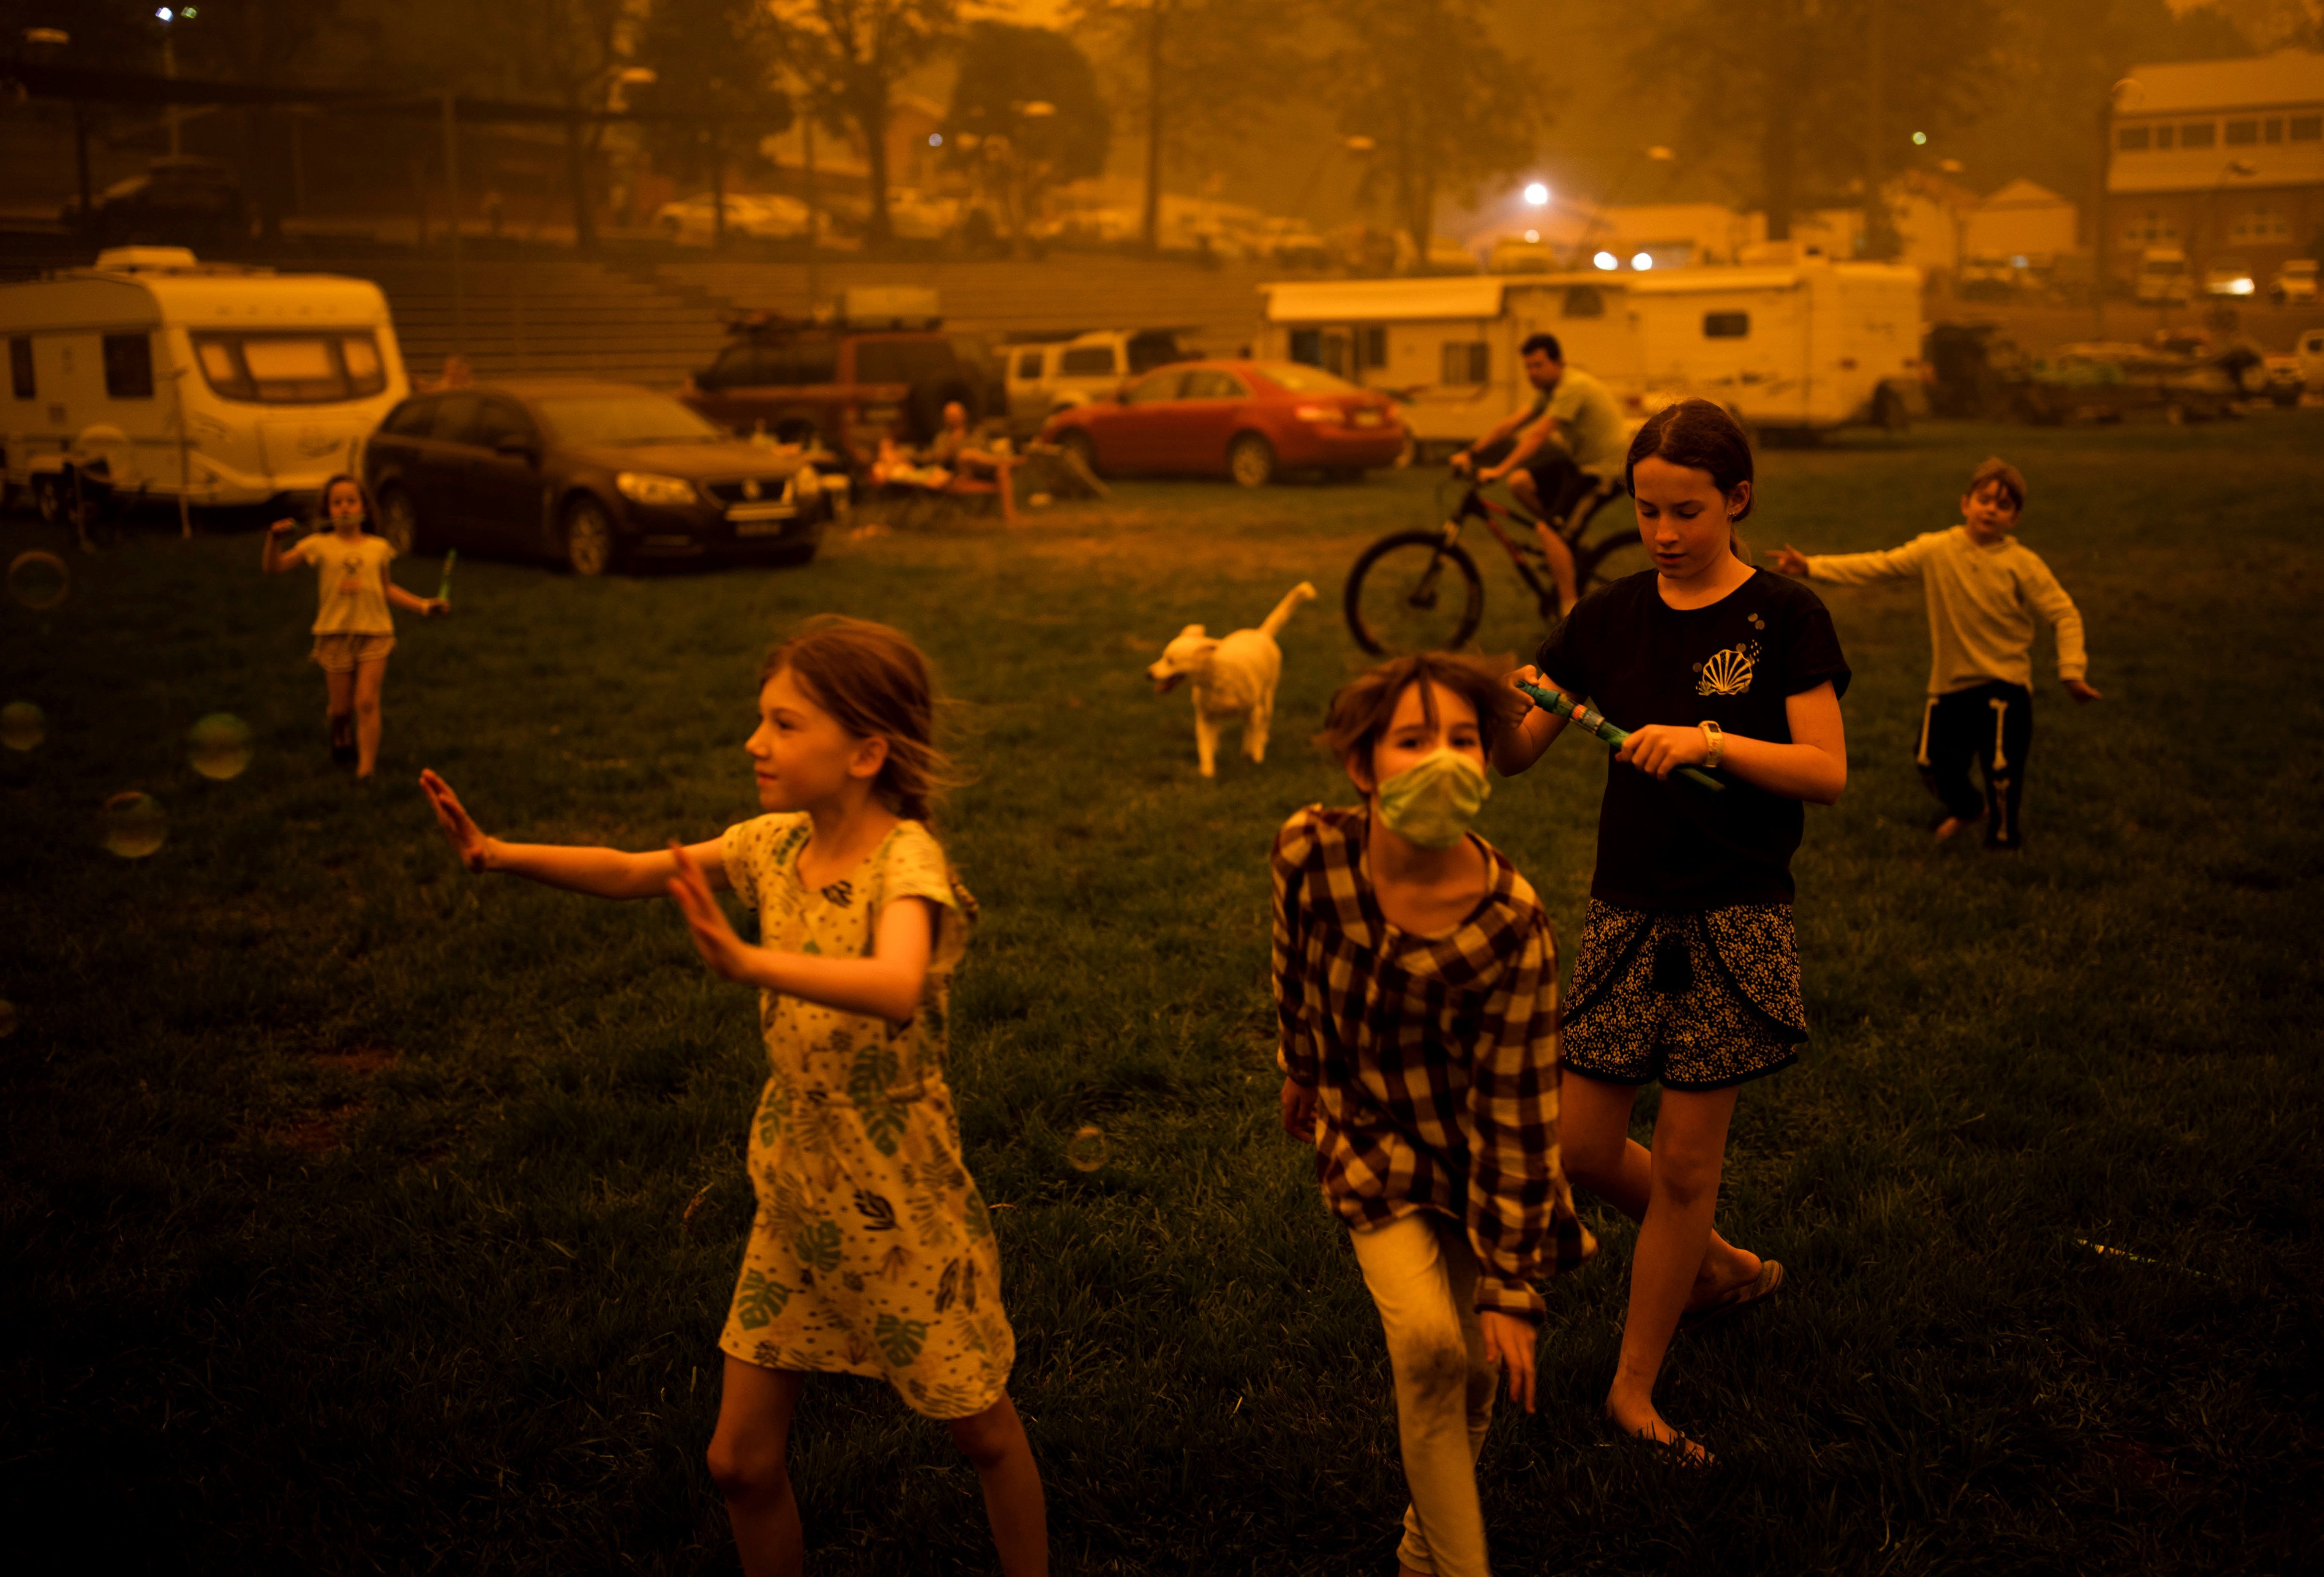 Children play at the showgrounds in the southern New South Wales town of Bega where they are camping after being evacuated from nearby sites affected by bushfires on December 31